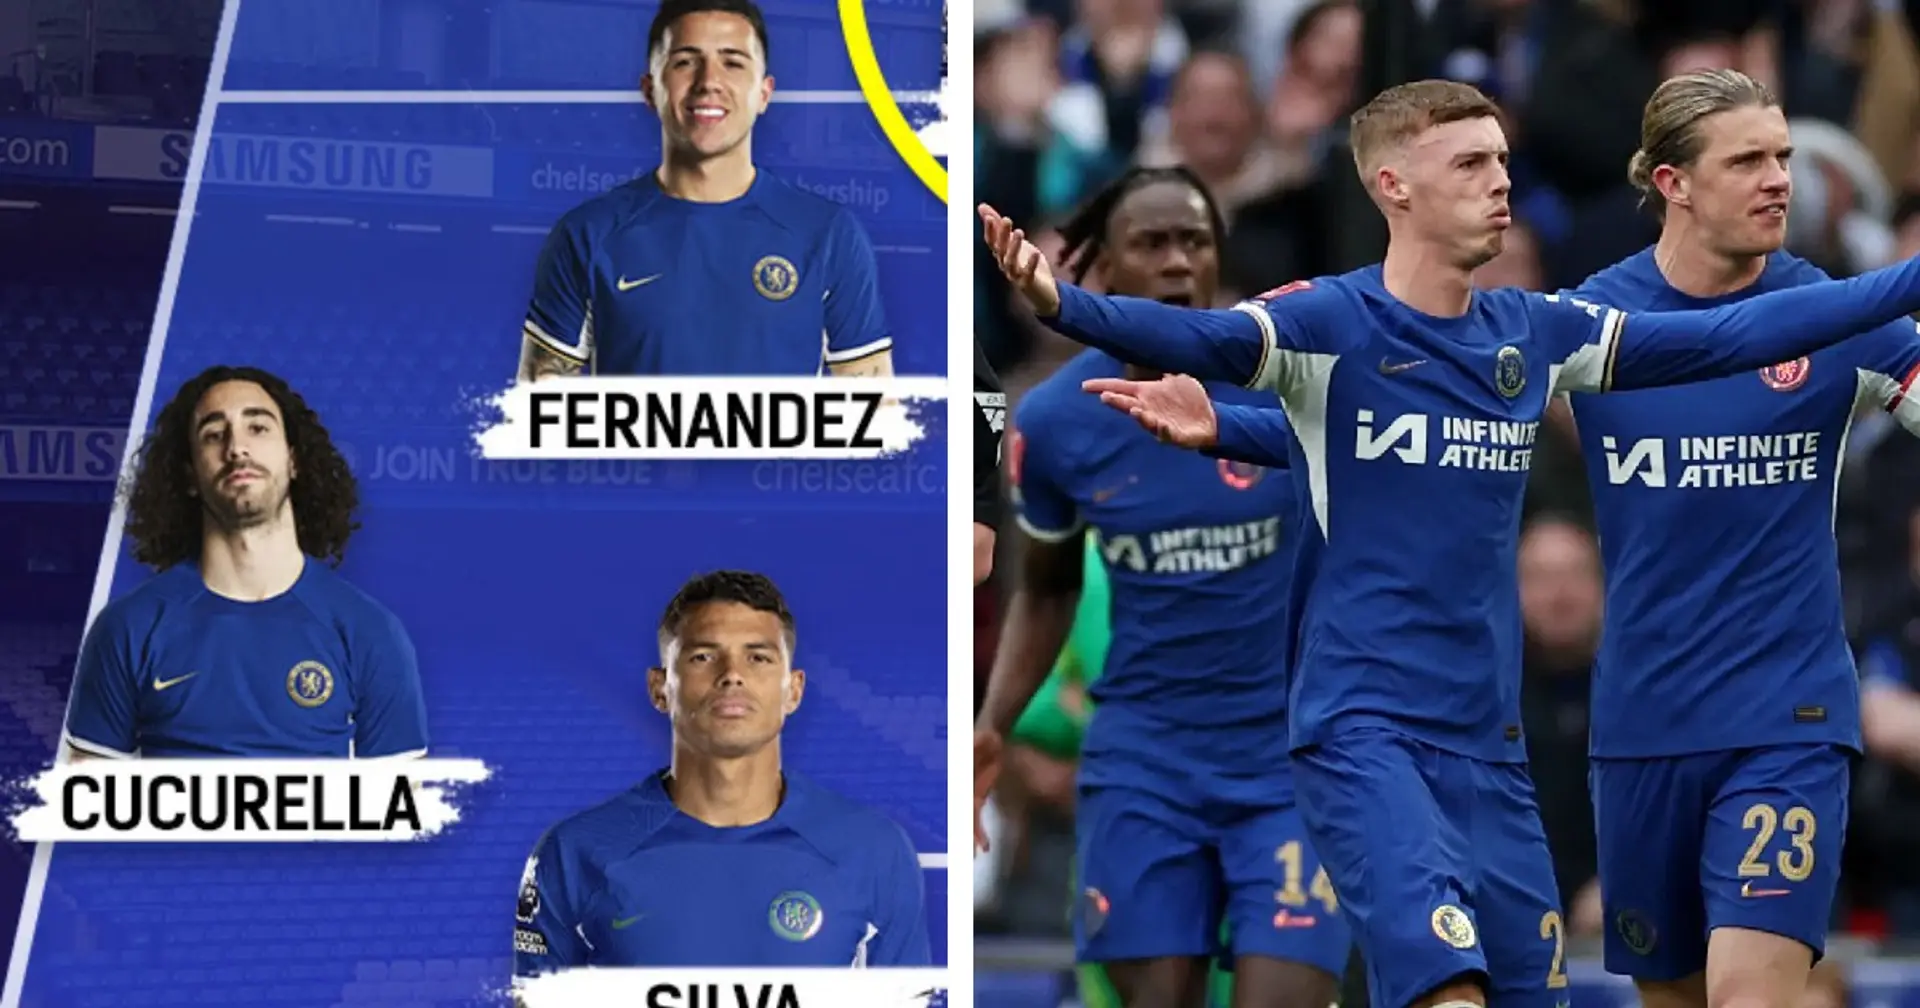 Chelsea's biggest strength in Man City defeat – shown in lineup